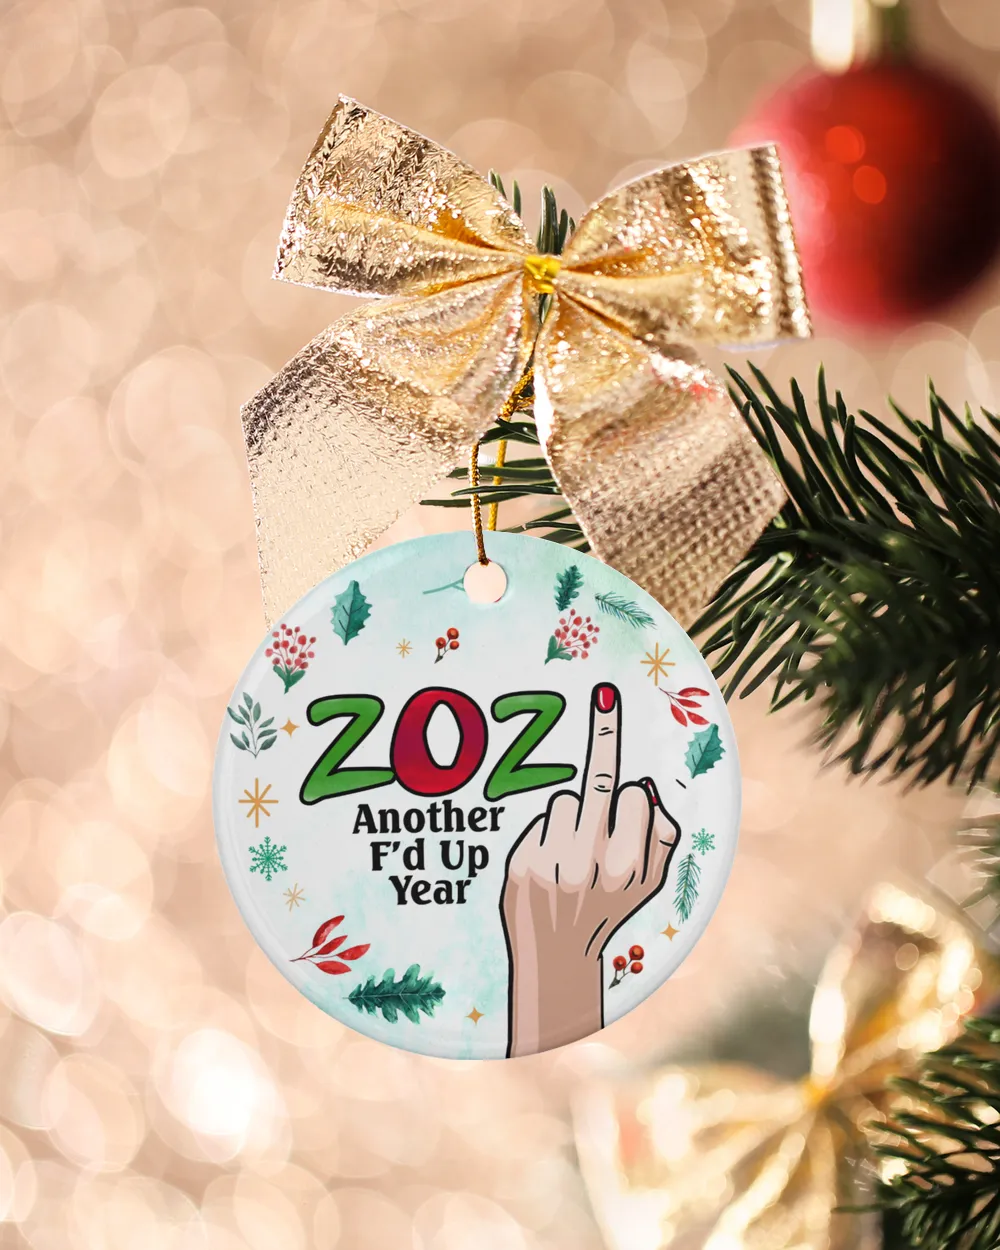 2021 Another F'd Up Year Ornament